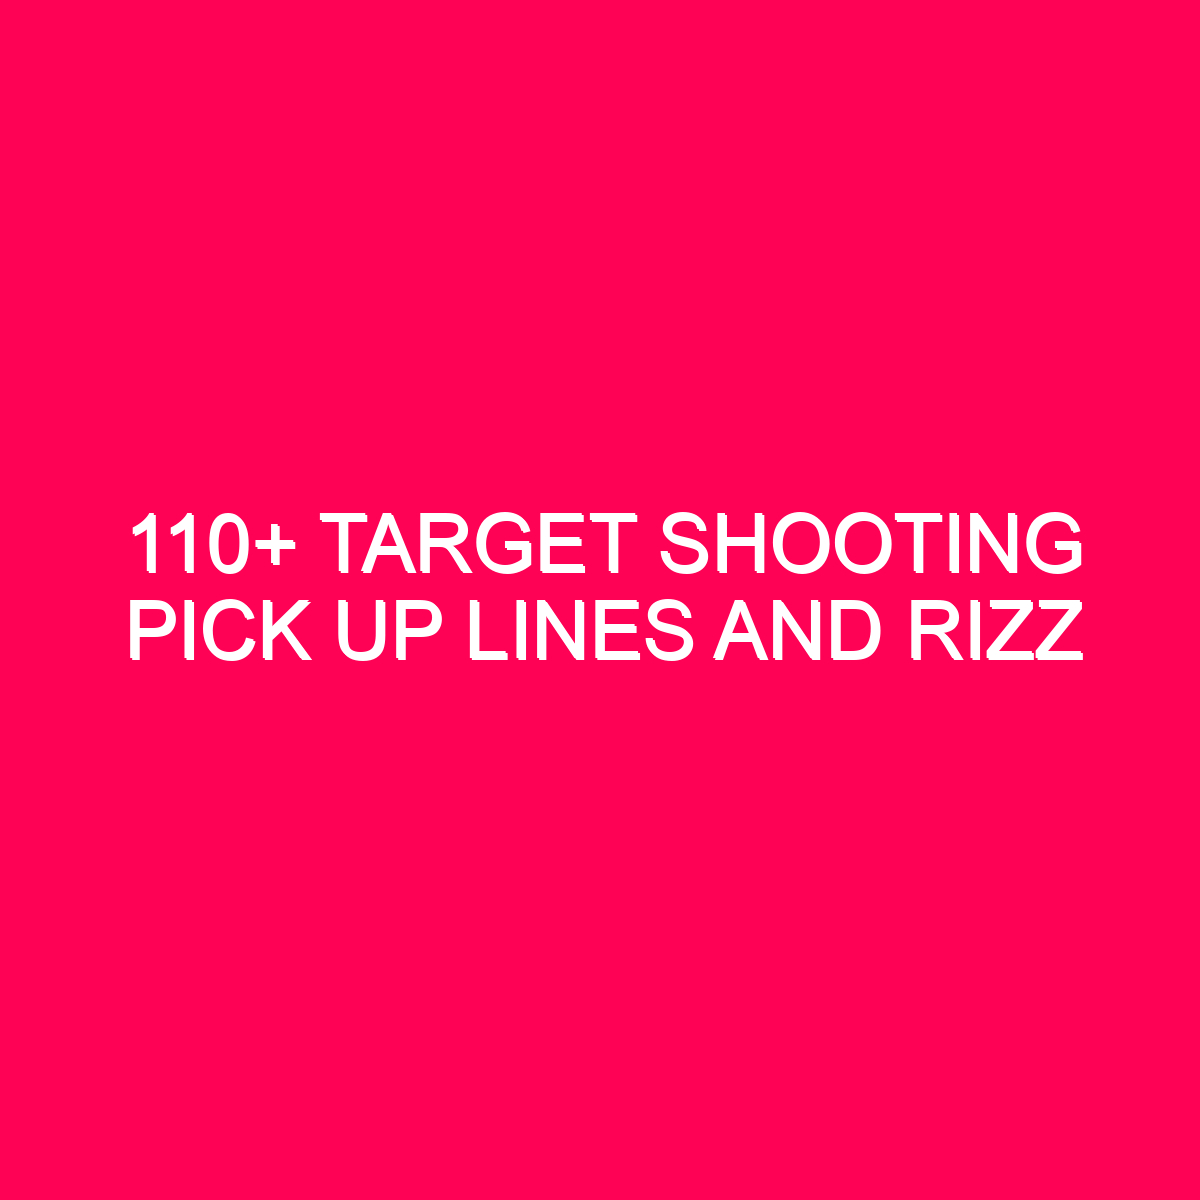 110+ Target Shooting Pick Up Lines And Rizz